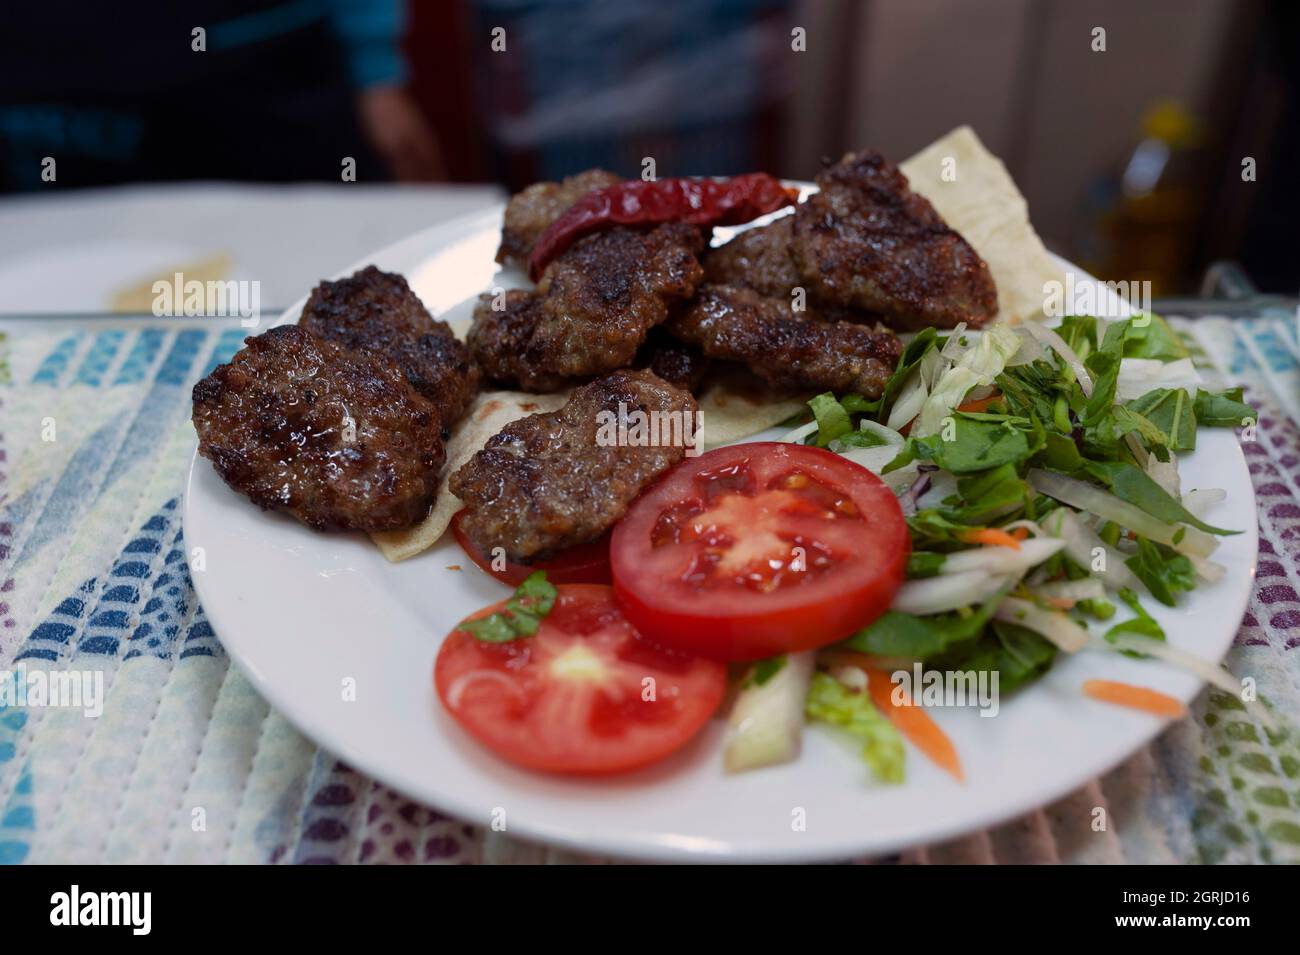 meatball bread, portion, meat dish, barbecue, fried meat, unhealthy diet, meatball, meatball between bread, meatball portion, restaurant Stock Photo